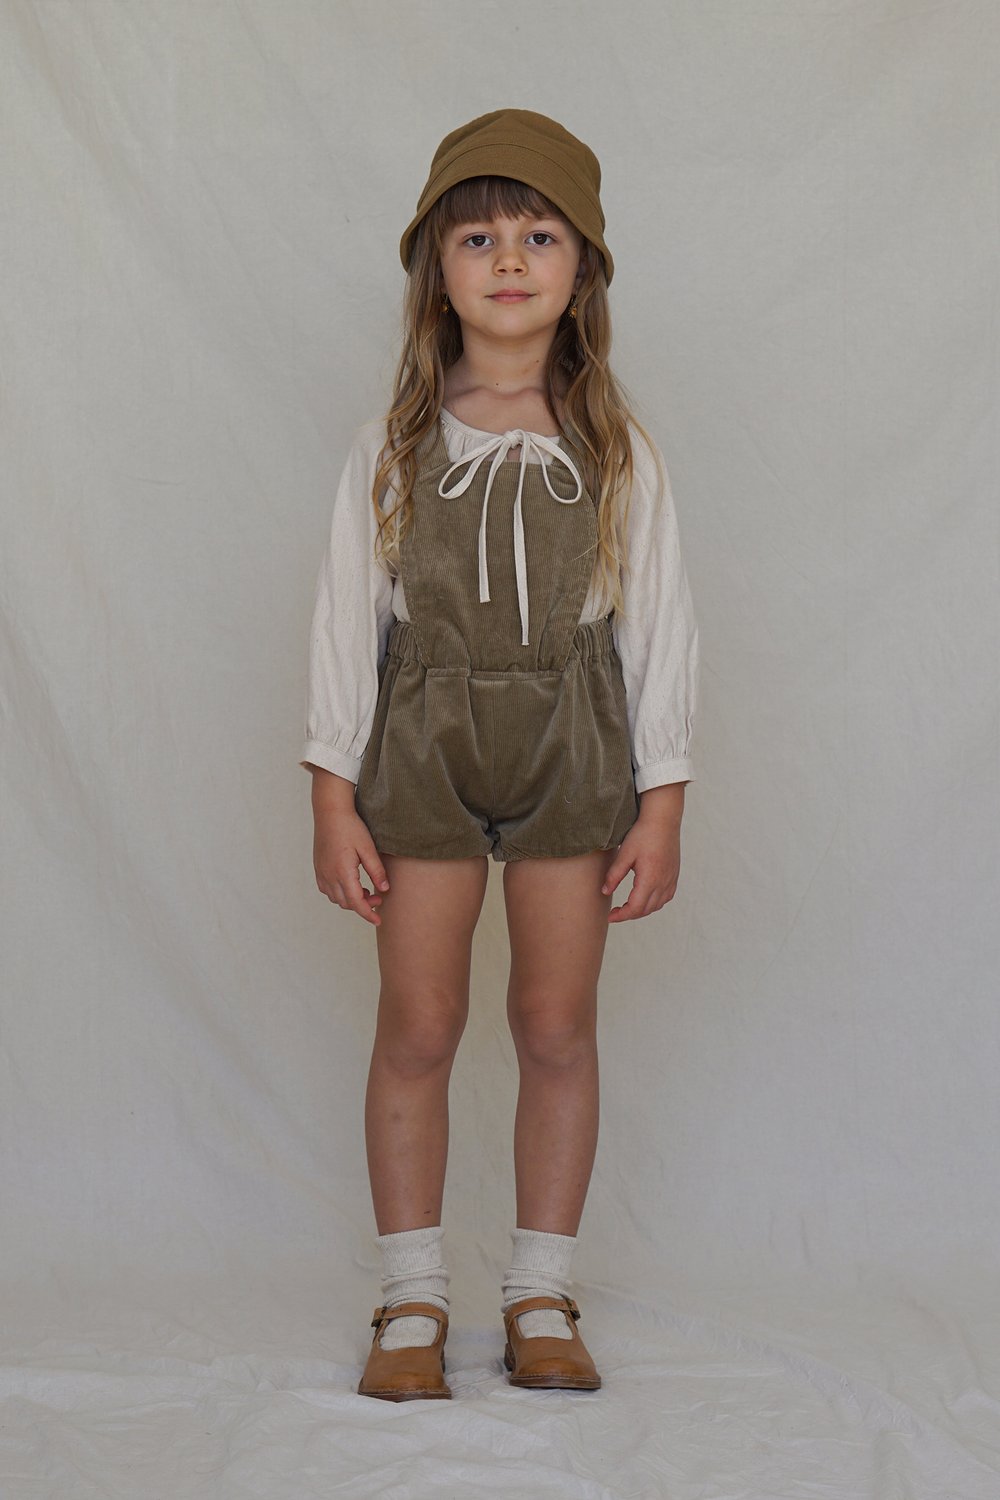 Children_of_the_Wild-Australia House of Paloma Anais Playsuit ~ Caper  Caper Cord, beautifully lined in a playful striped cotton.